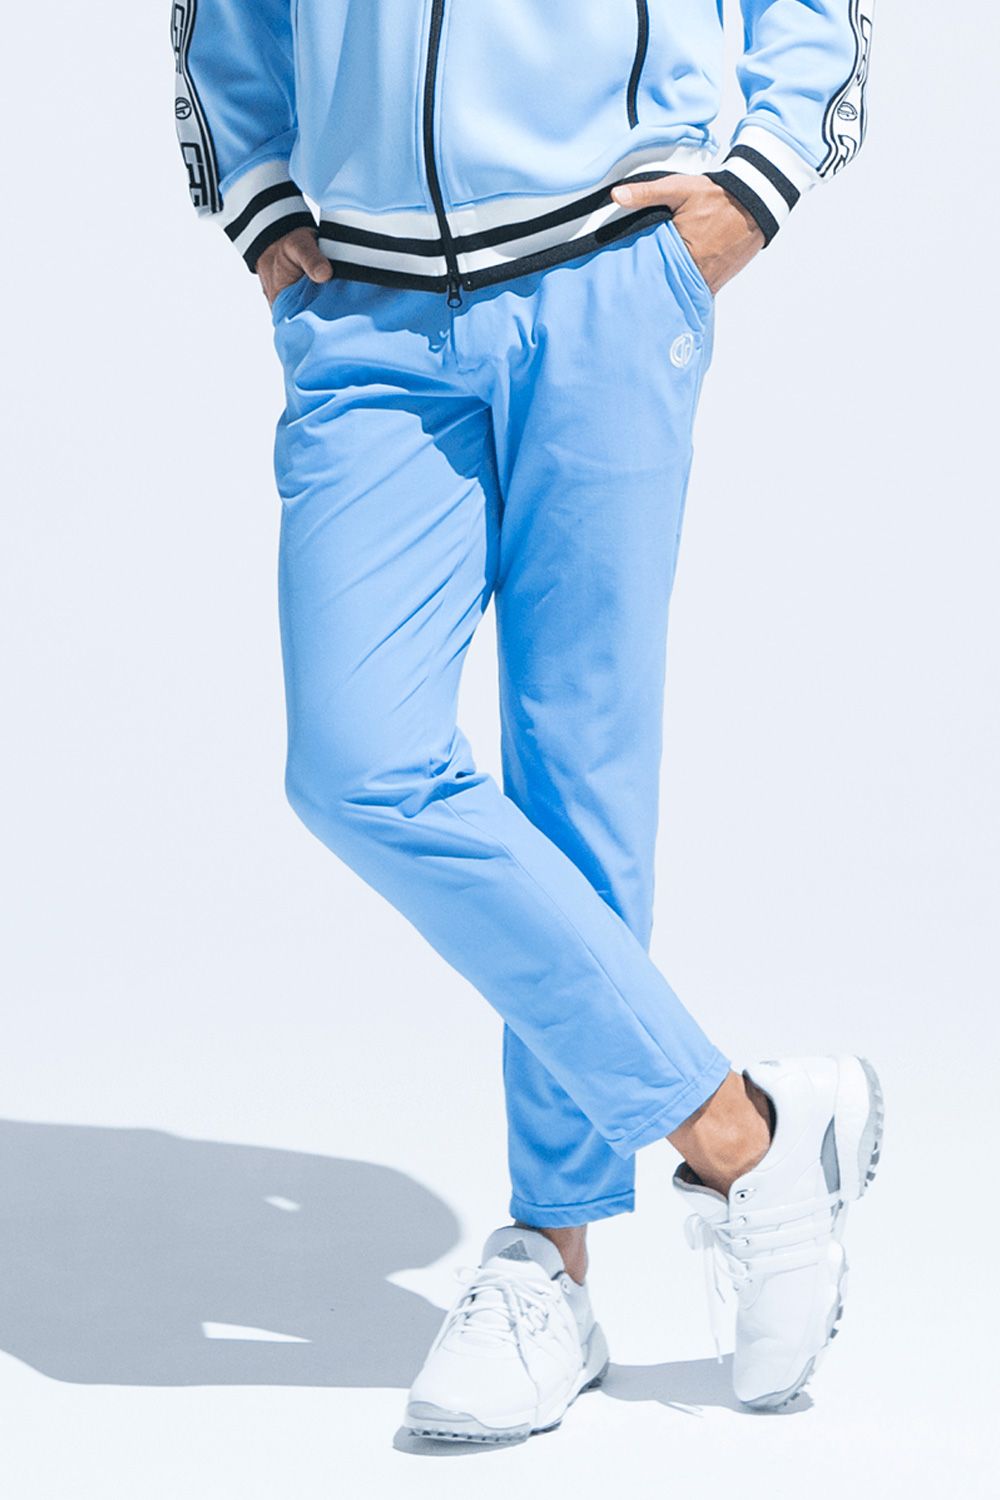 CPG GOLF - DRY TOUCH SILHOUETTE PANTS / ドライタッチ シルエット